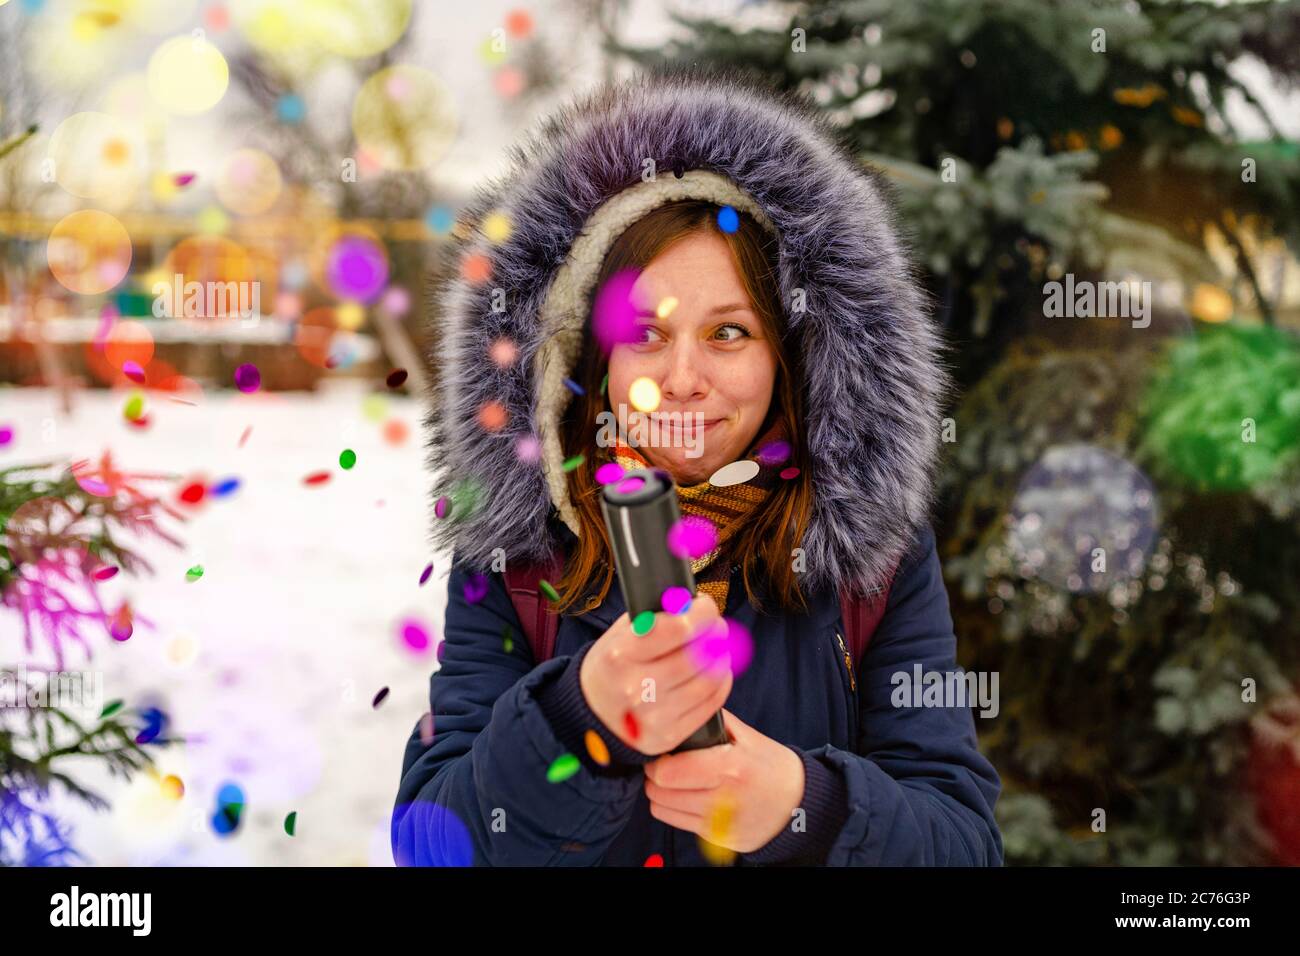 Emotional woman pops confetti petard and opens her mouth with delight. Adult female in hooded jacket admires and pops confetti petard into camera Stock Photo